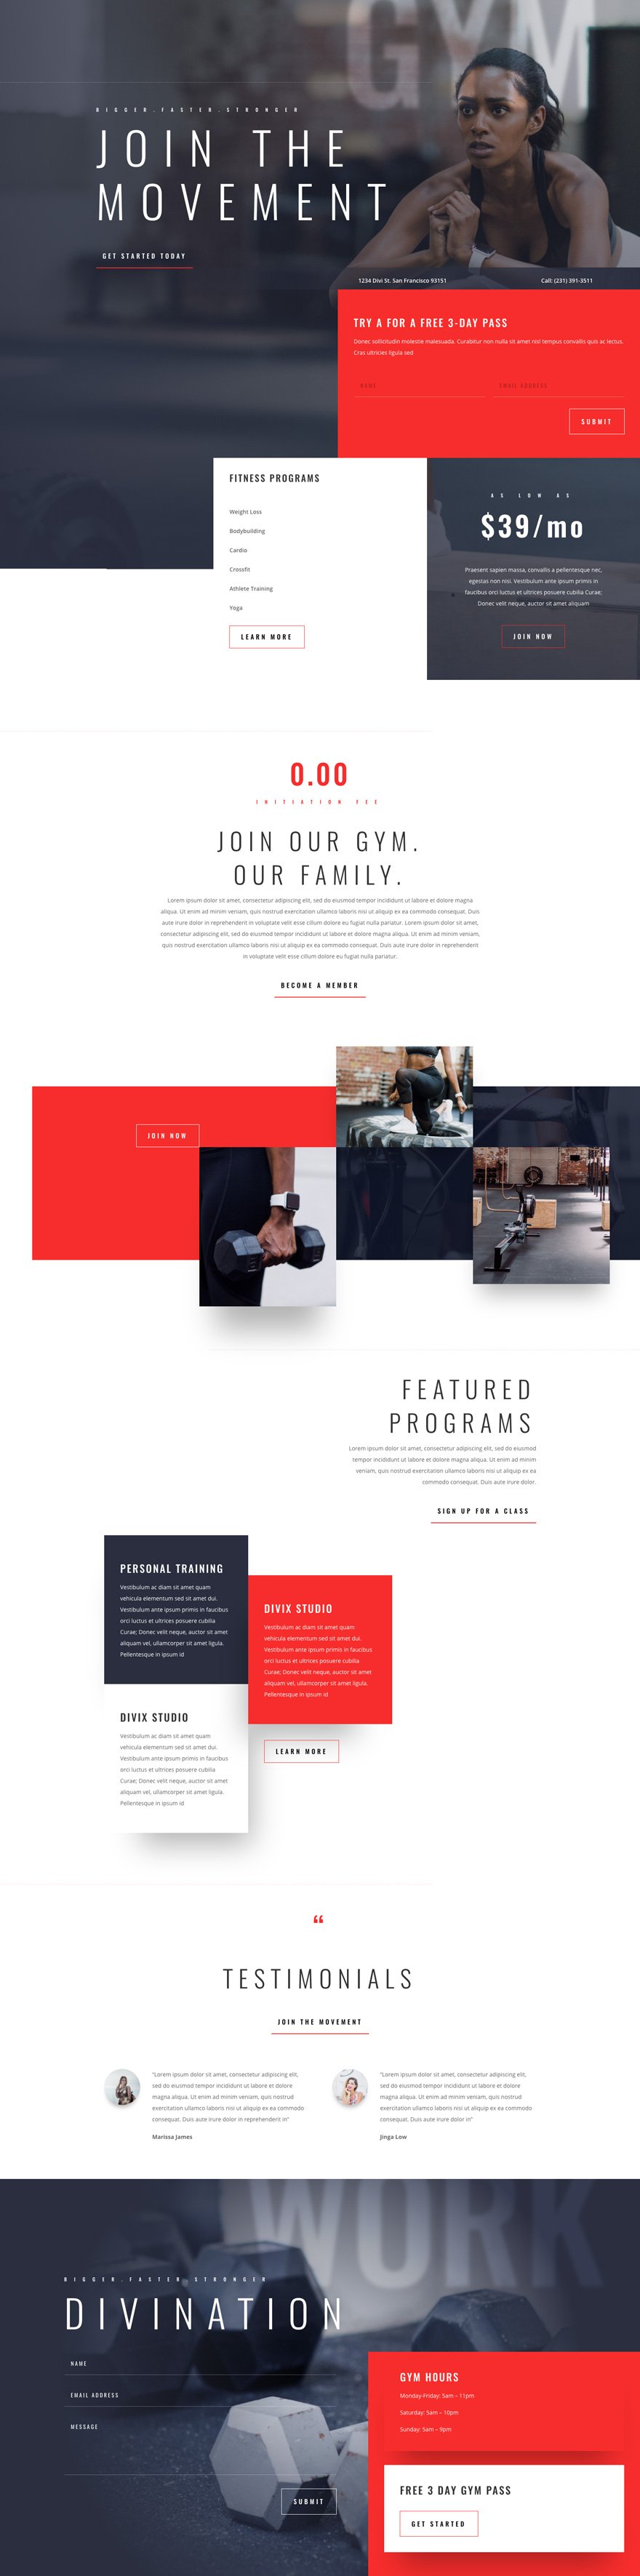 Fitness Gym Landing Page Divi Layout by Elegant Themes